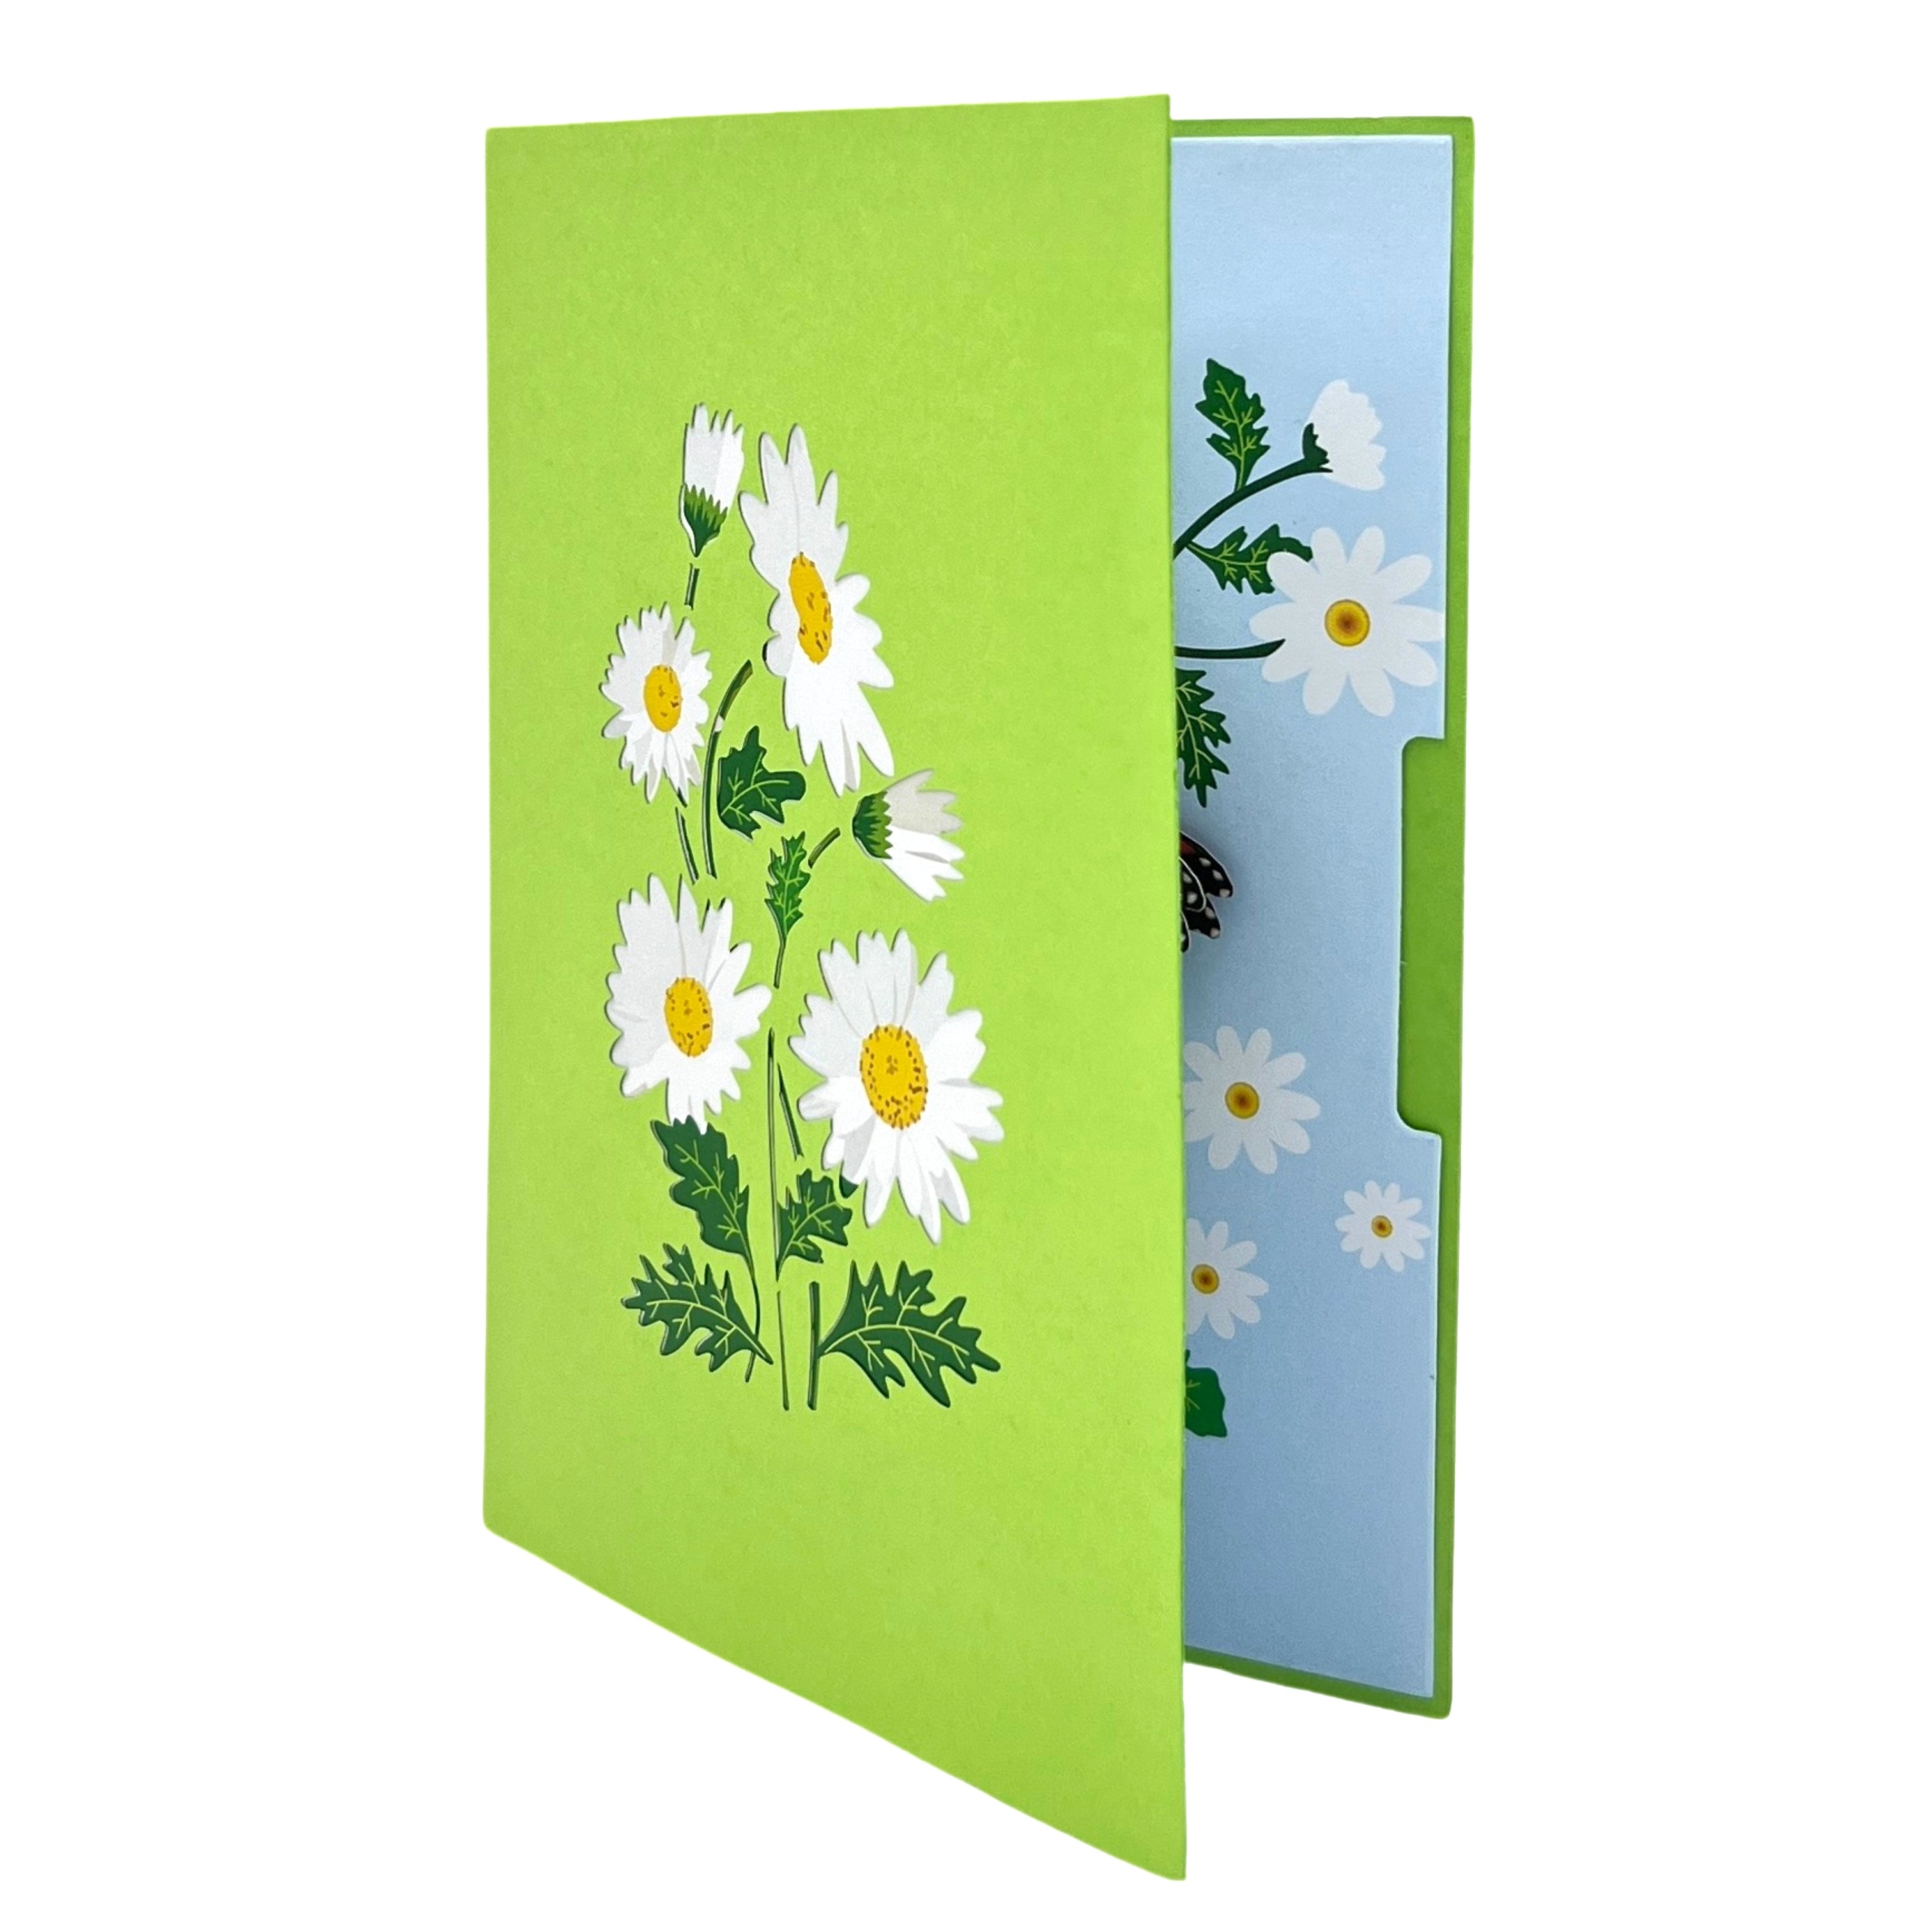 FreshCut Paper Pop Up Field of Daisies 3D Greeting Card